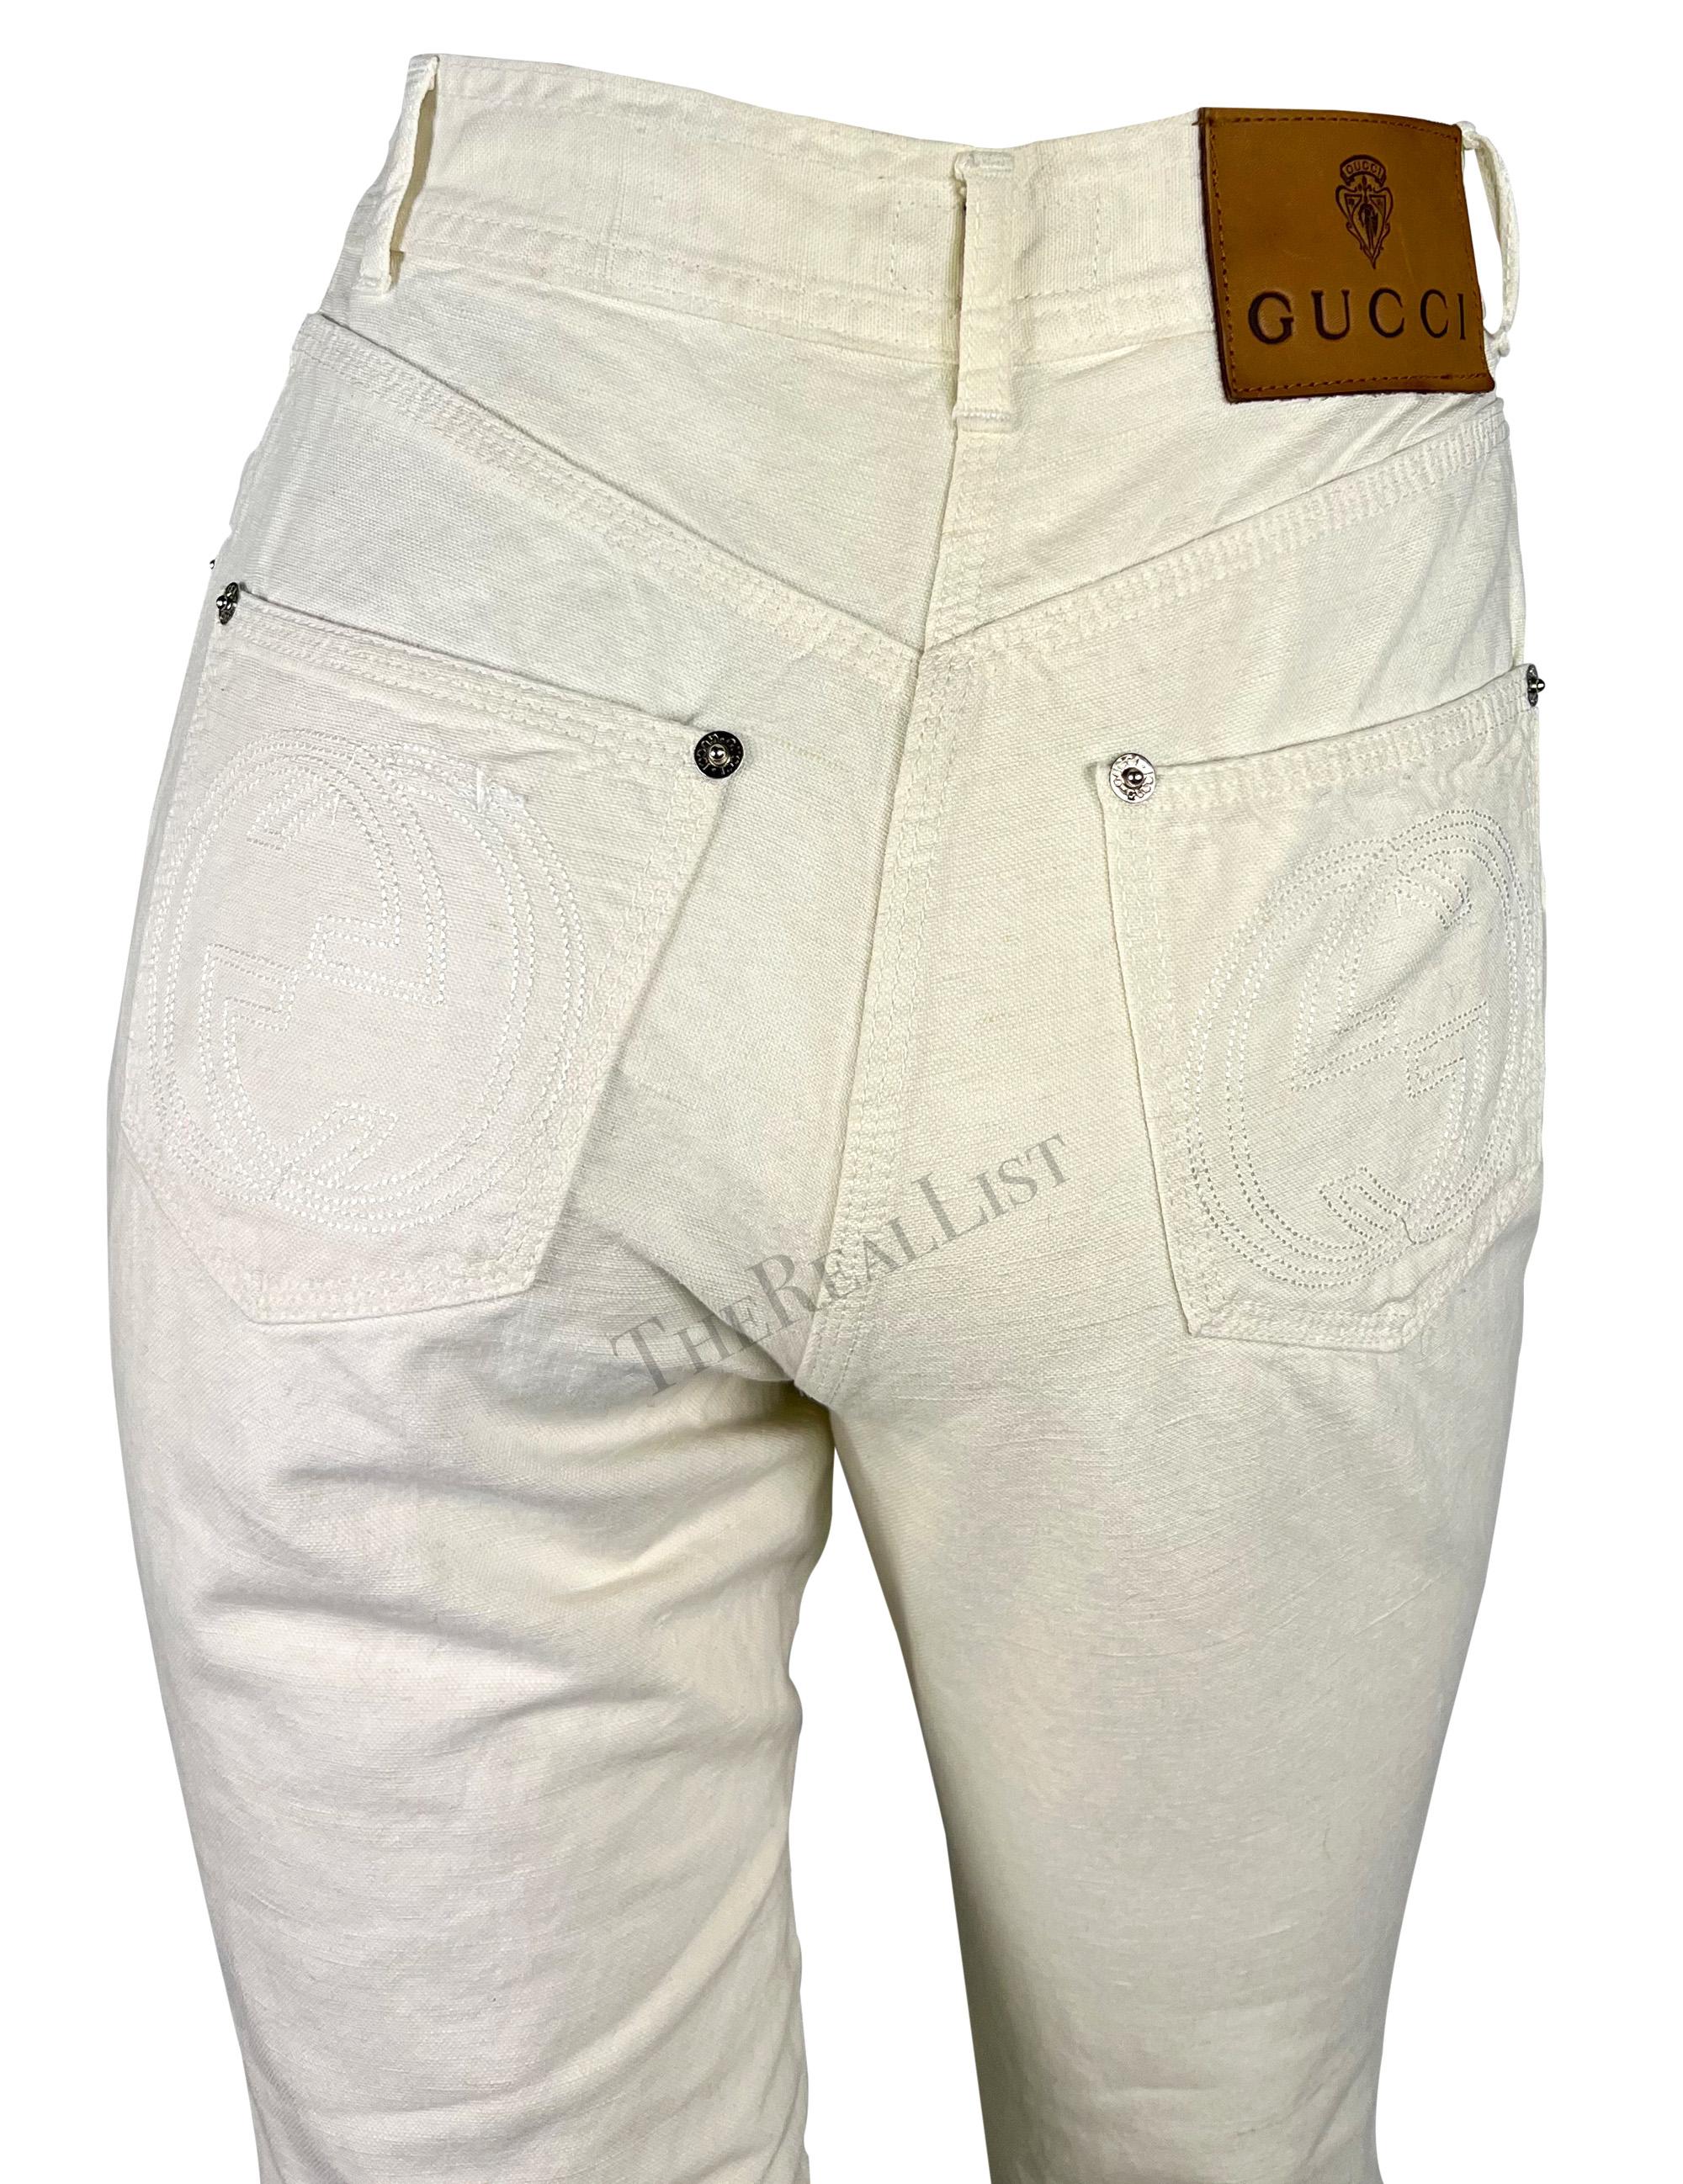 Presenting a pair of off-white linen Gucci pants, designed by Tom Ford. From the Spring/Summer 1995 collection, these high-waisted pants are constructed of a lightweight cotton and linen blend. Featuring large interlocking 'GG' logos on the back